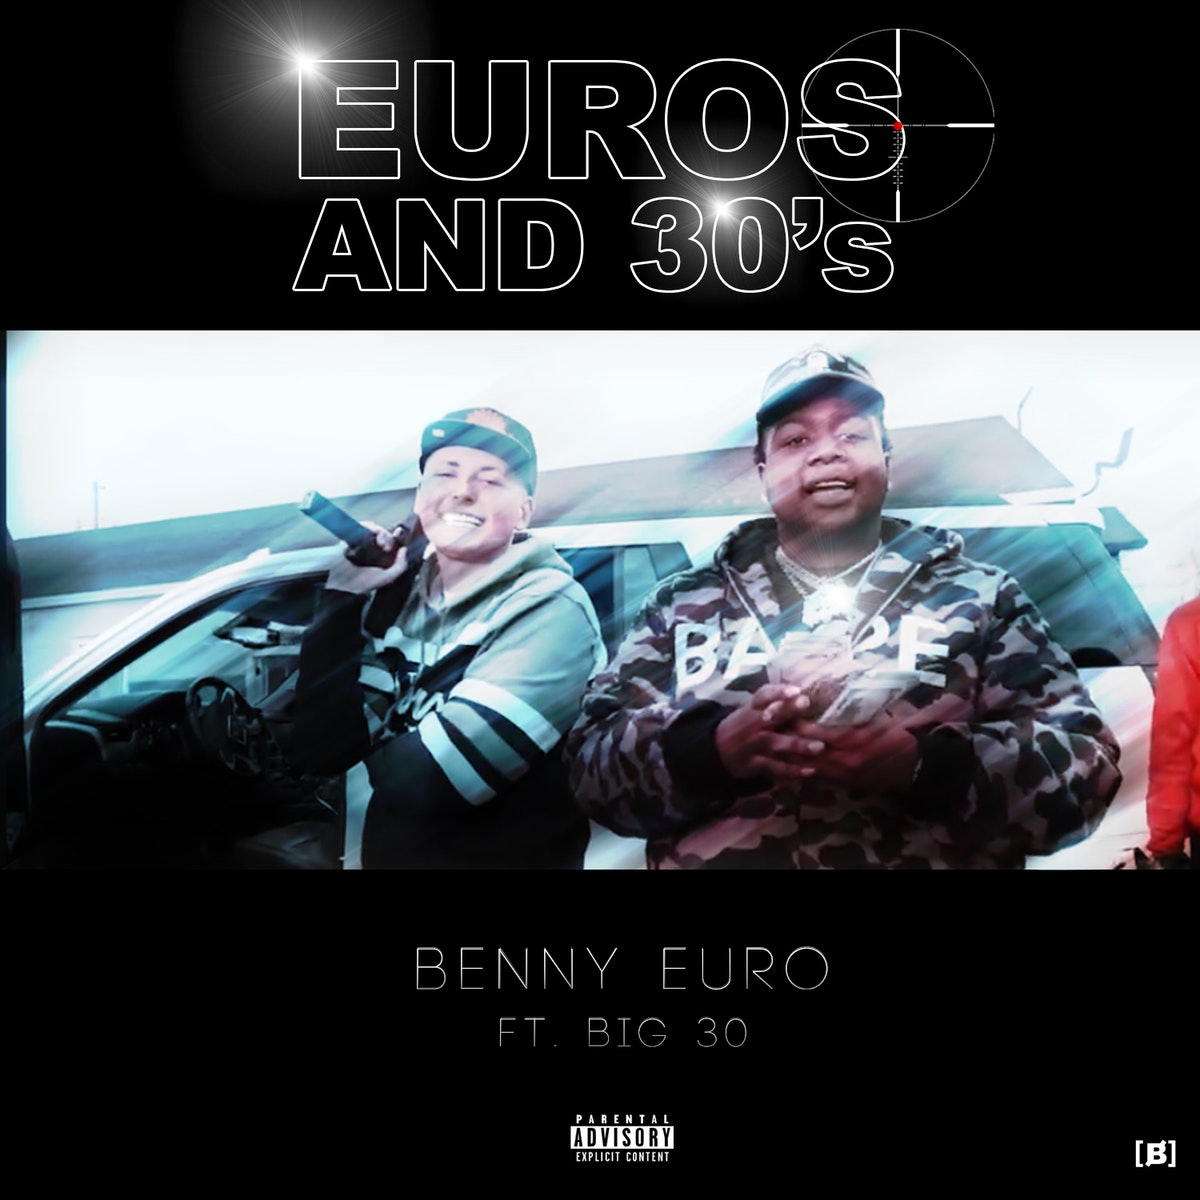 [New Video] BIG30 x BENNY EURO – EUROS & 30’S (Shot by @directorbaileyross)